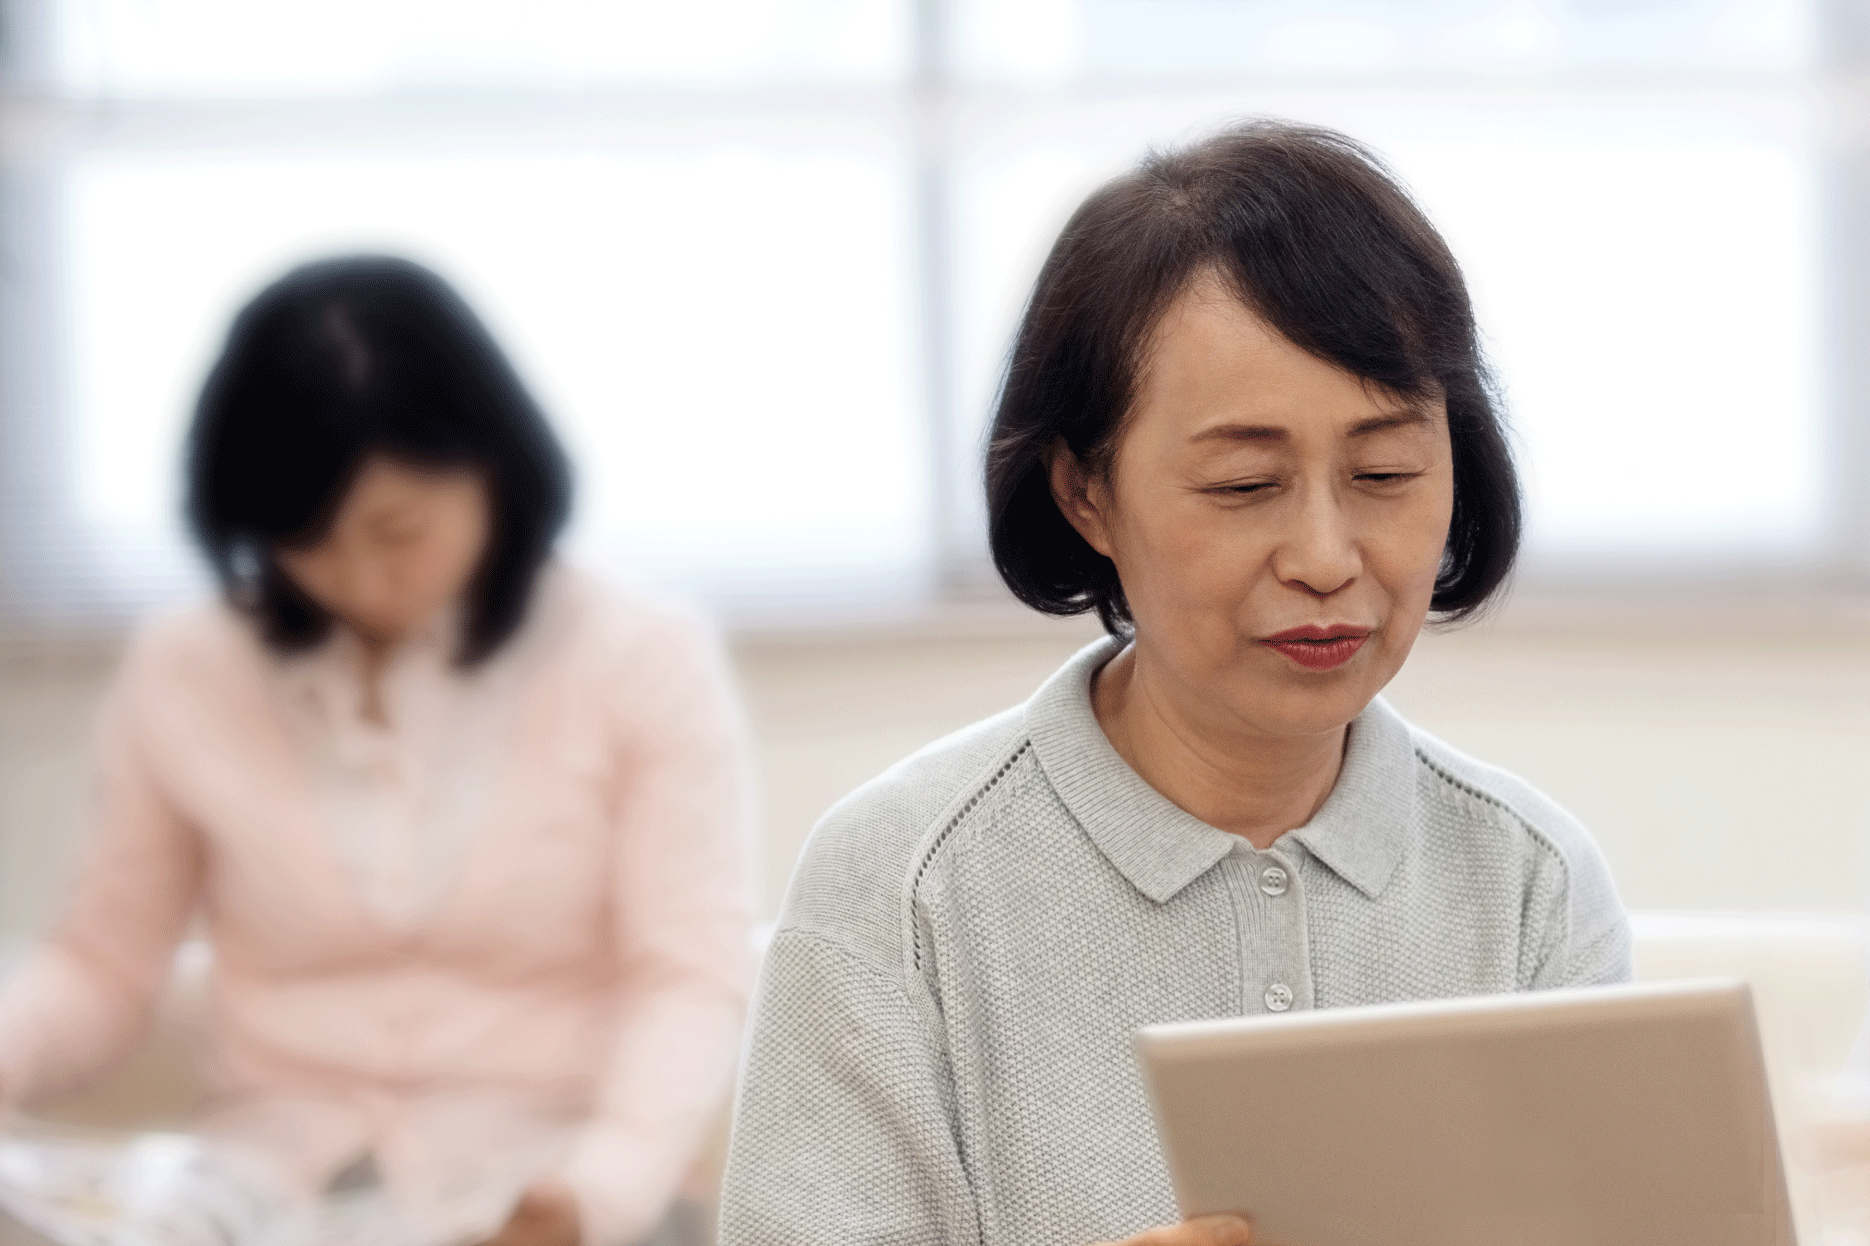 Asian woman looking at tablet device.